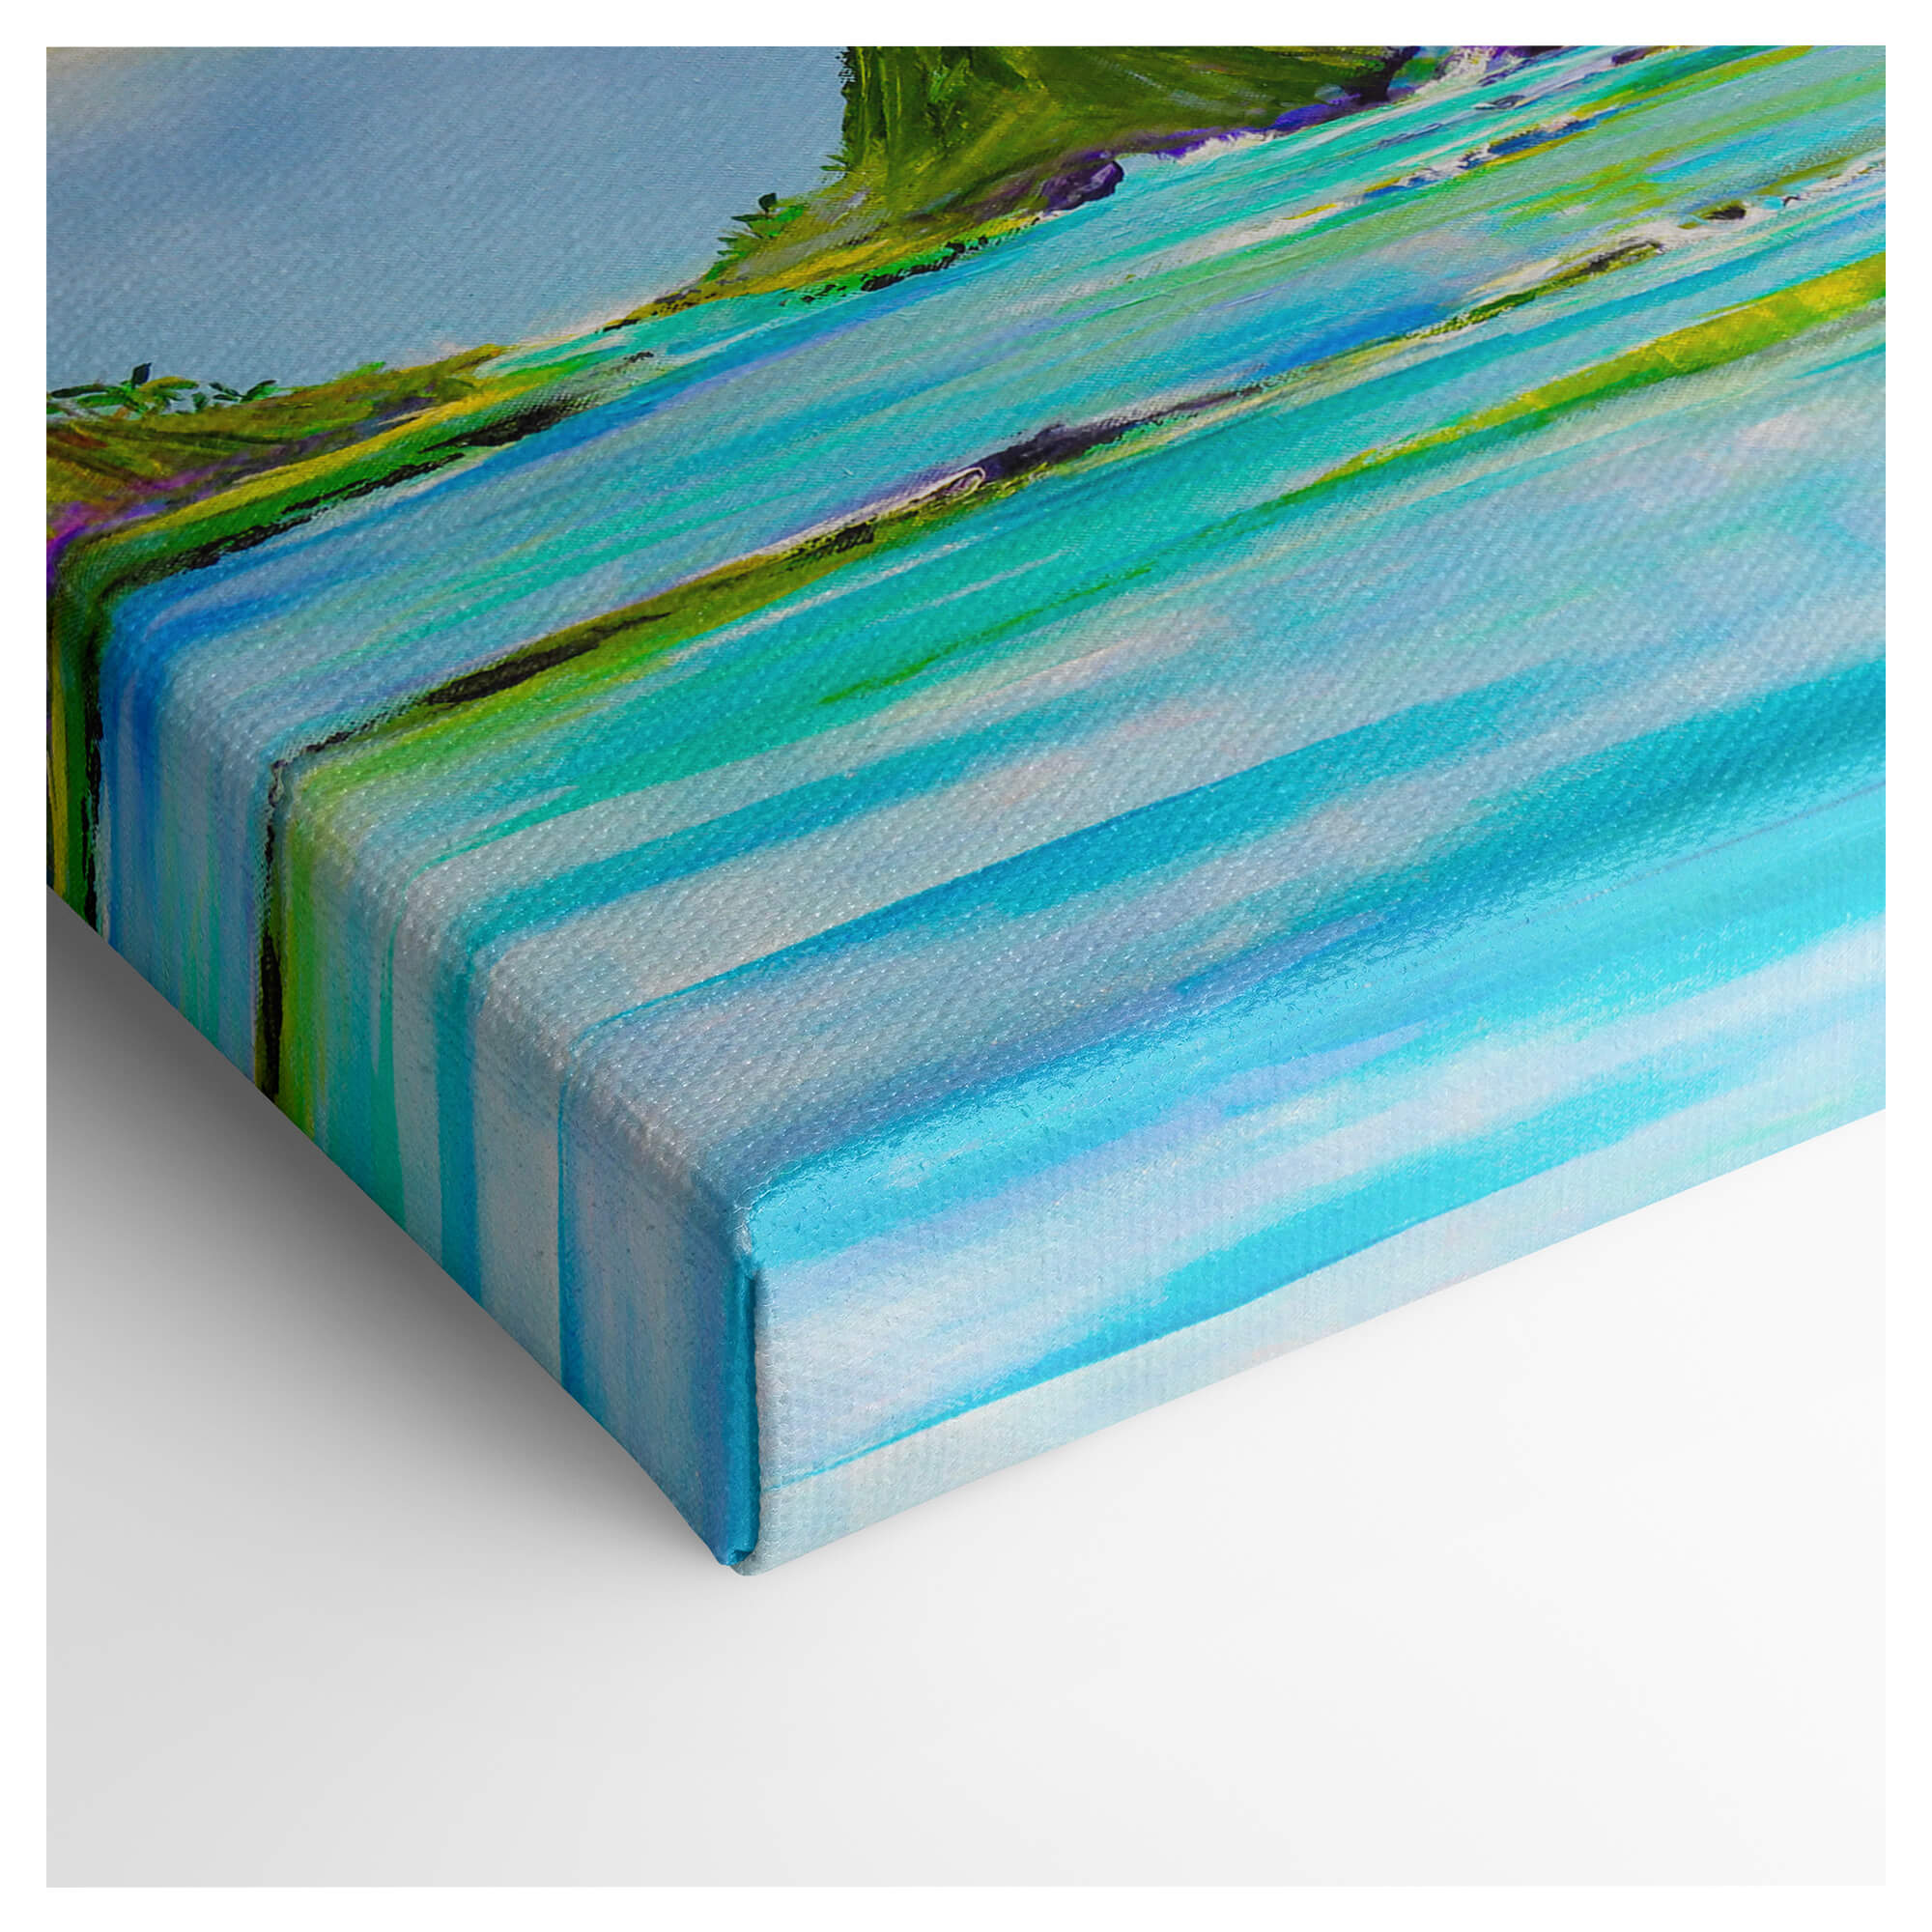 Green and teal colored ocean water and distant mountain by Hawaii artist Jess Burda